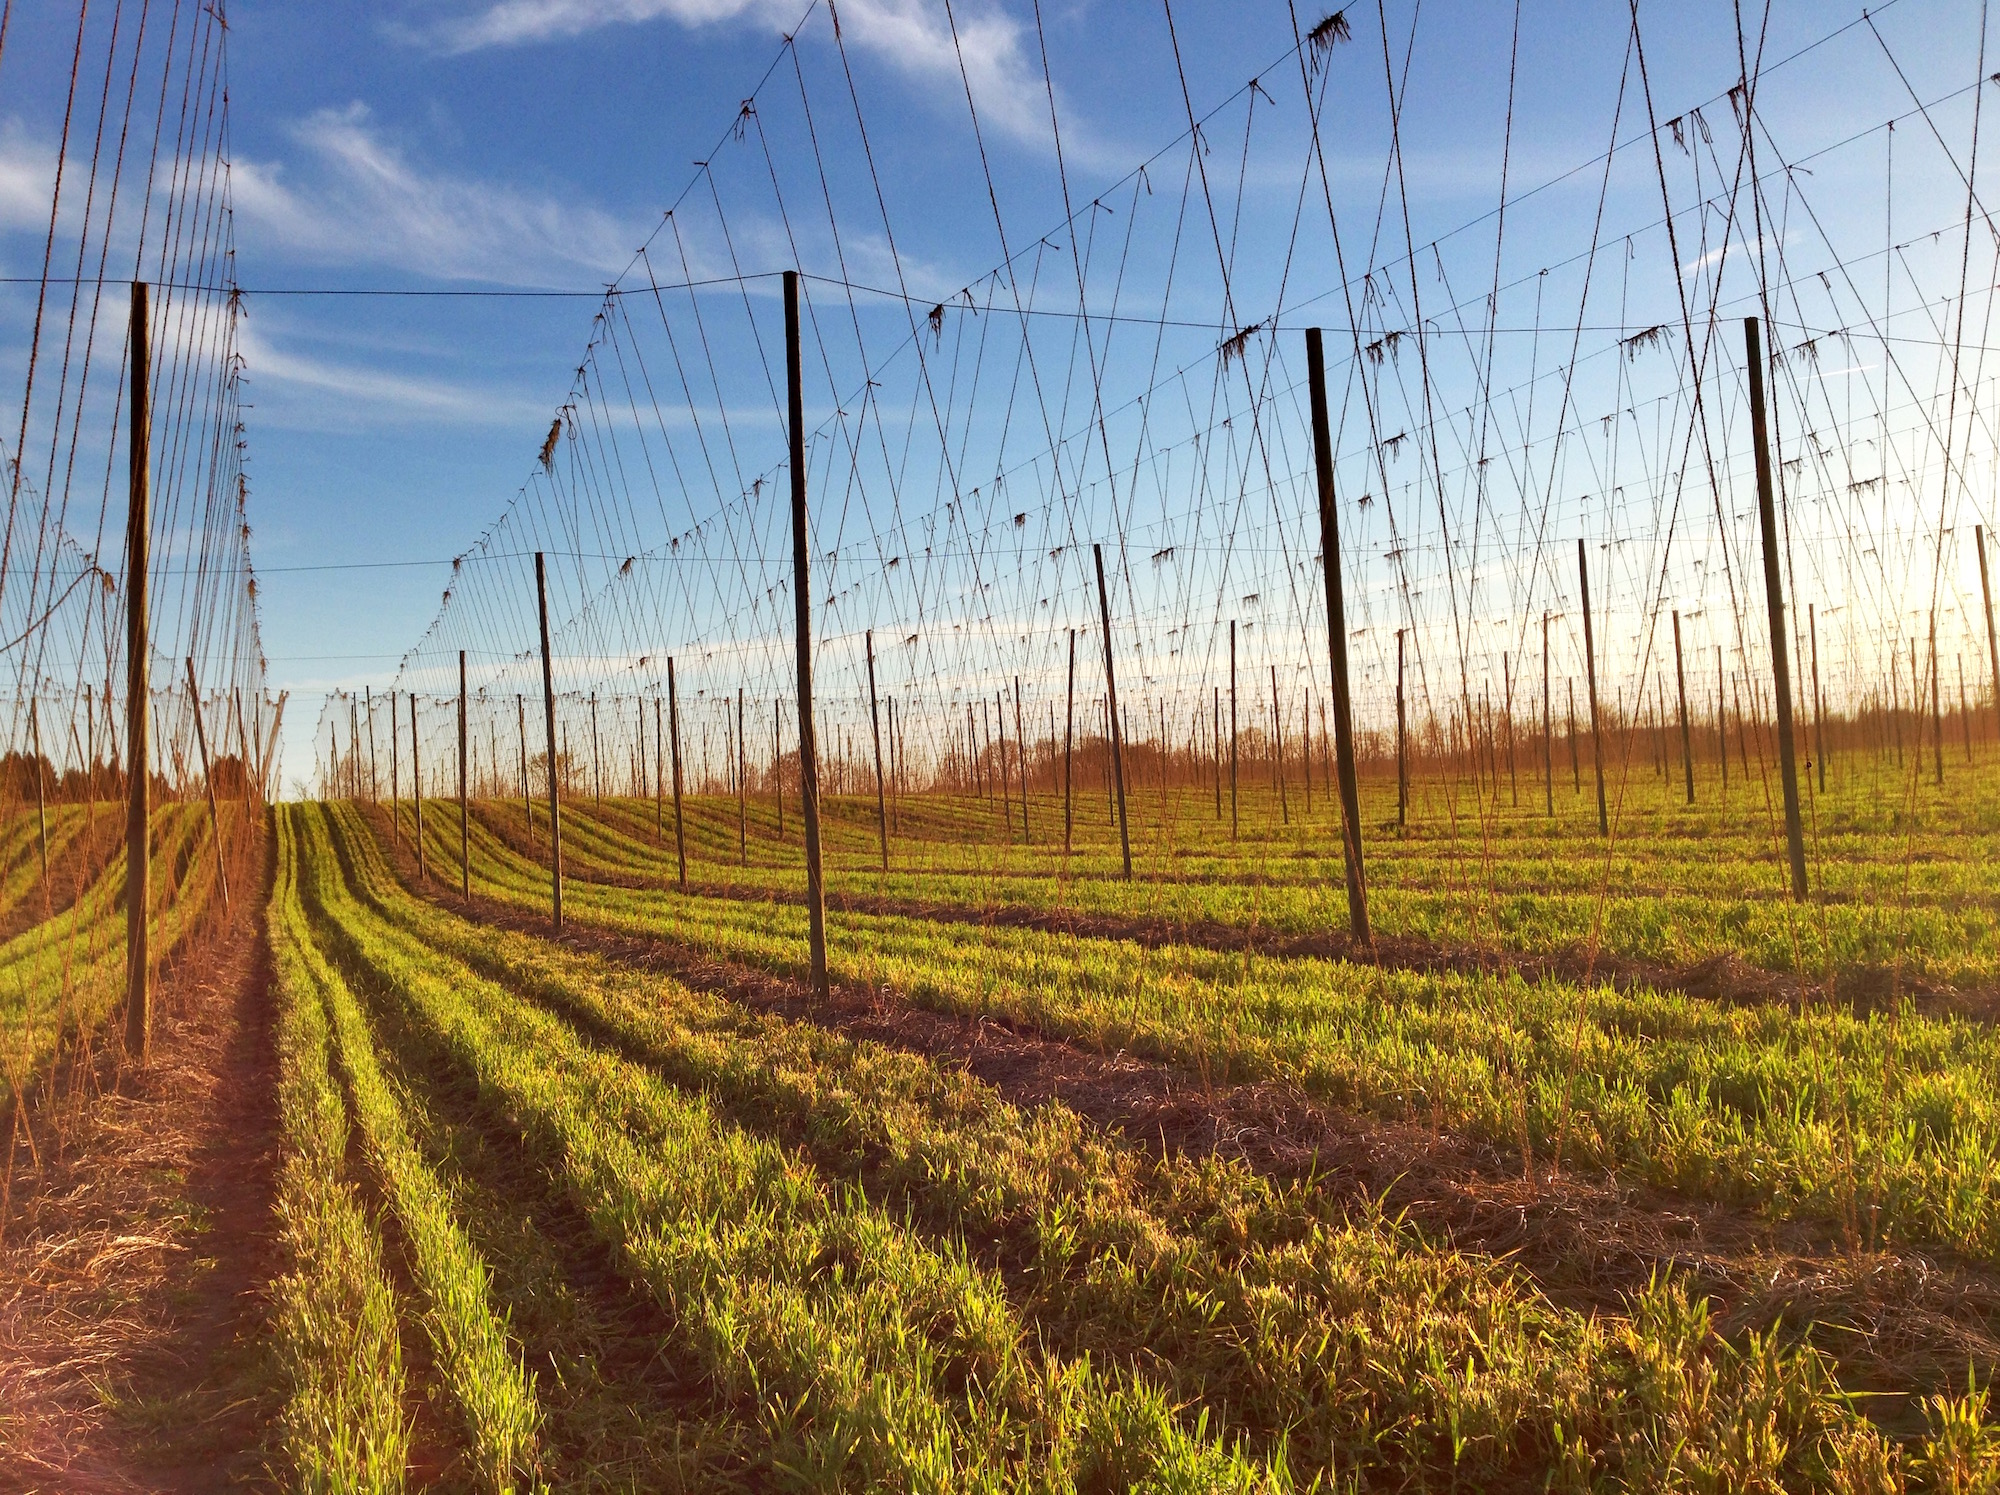 Cover Crops in the Hops, 4/25